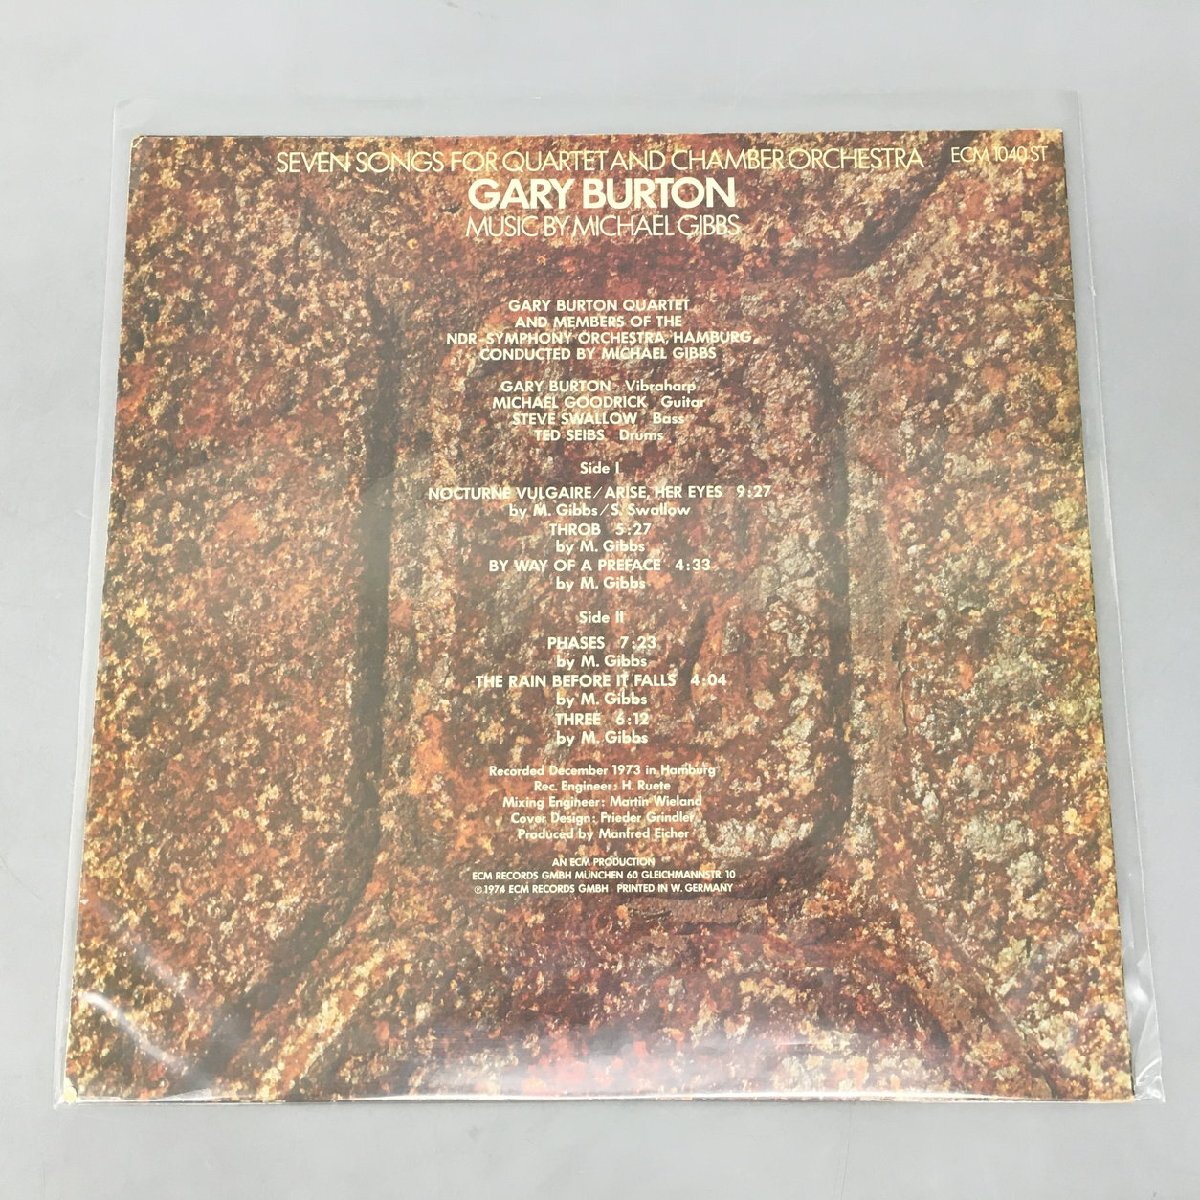 LP record Gary Burton / Seven Songs For Quartet And Chamber Orchestra ECM 1040 ST 2405LO086